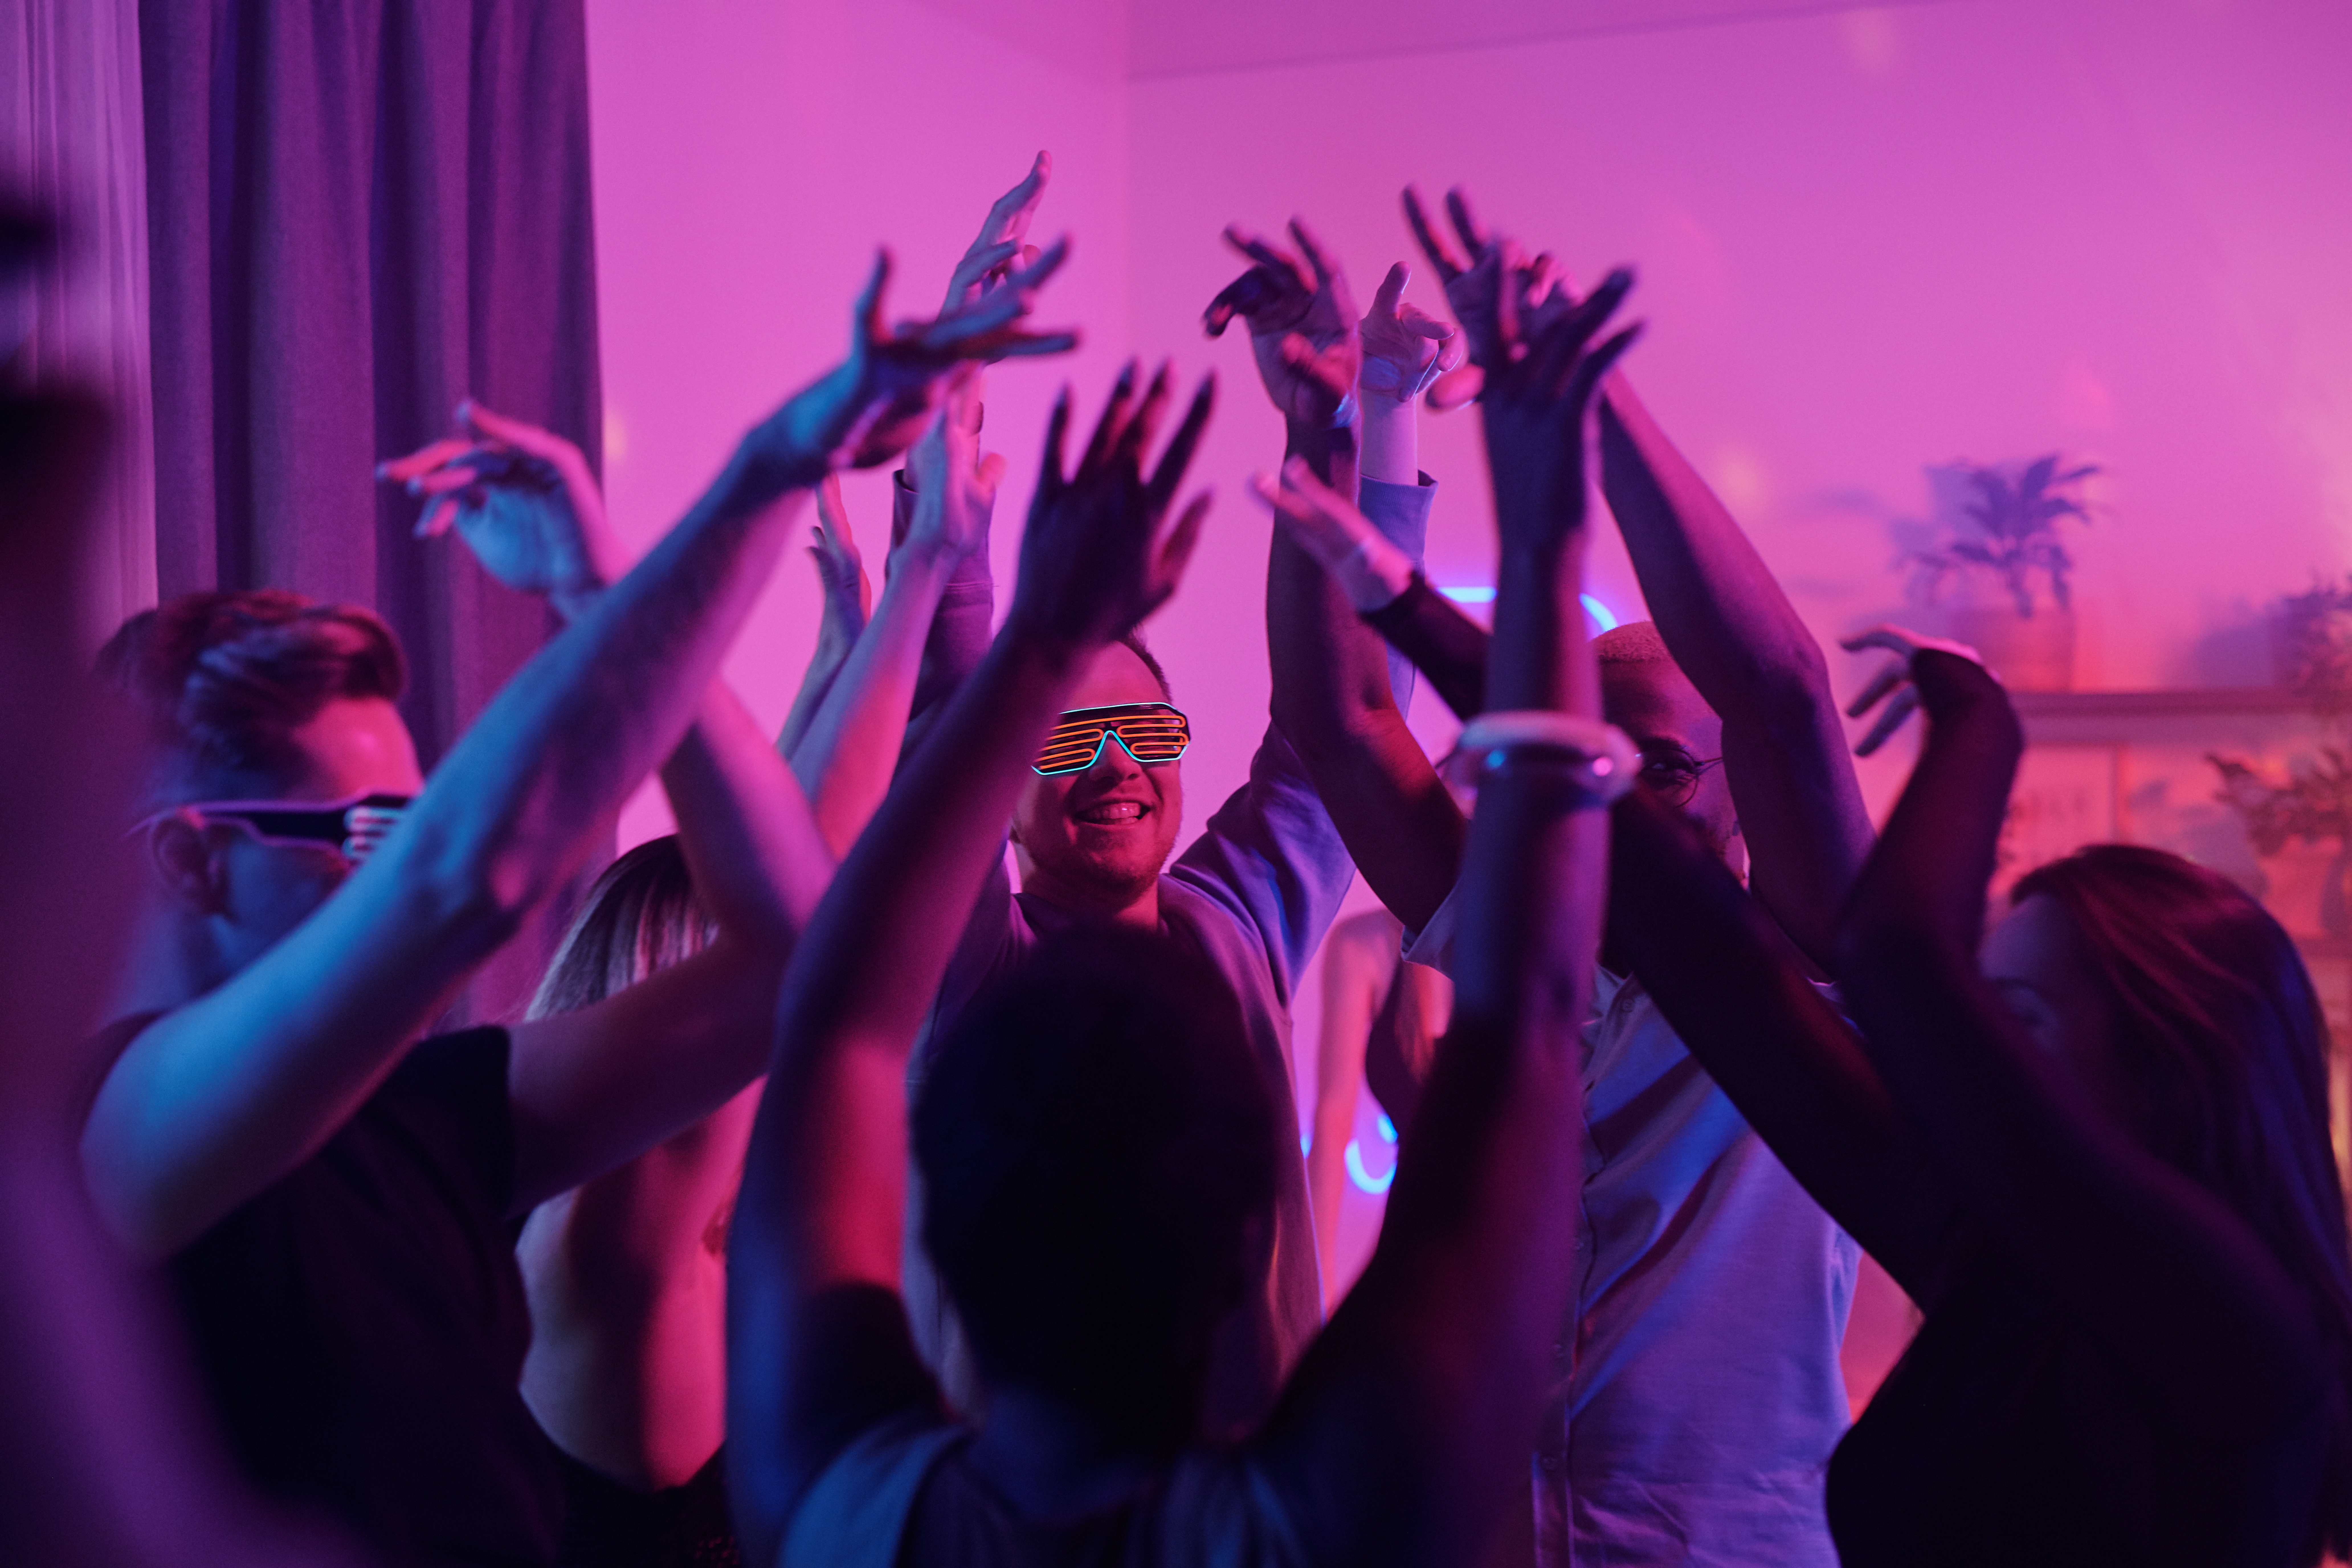 Young intercultural glamorous friends raising their arms while dancing at party